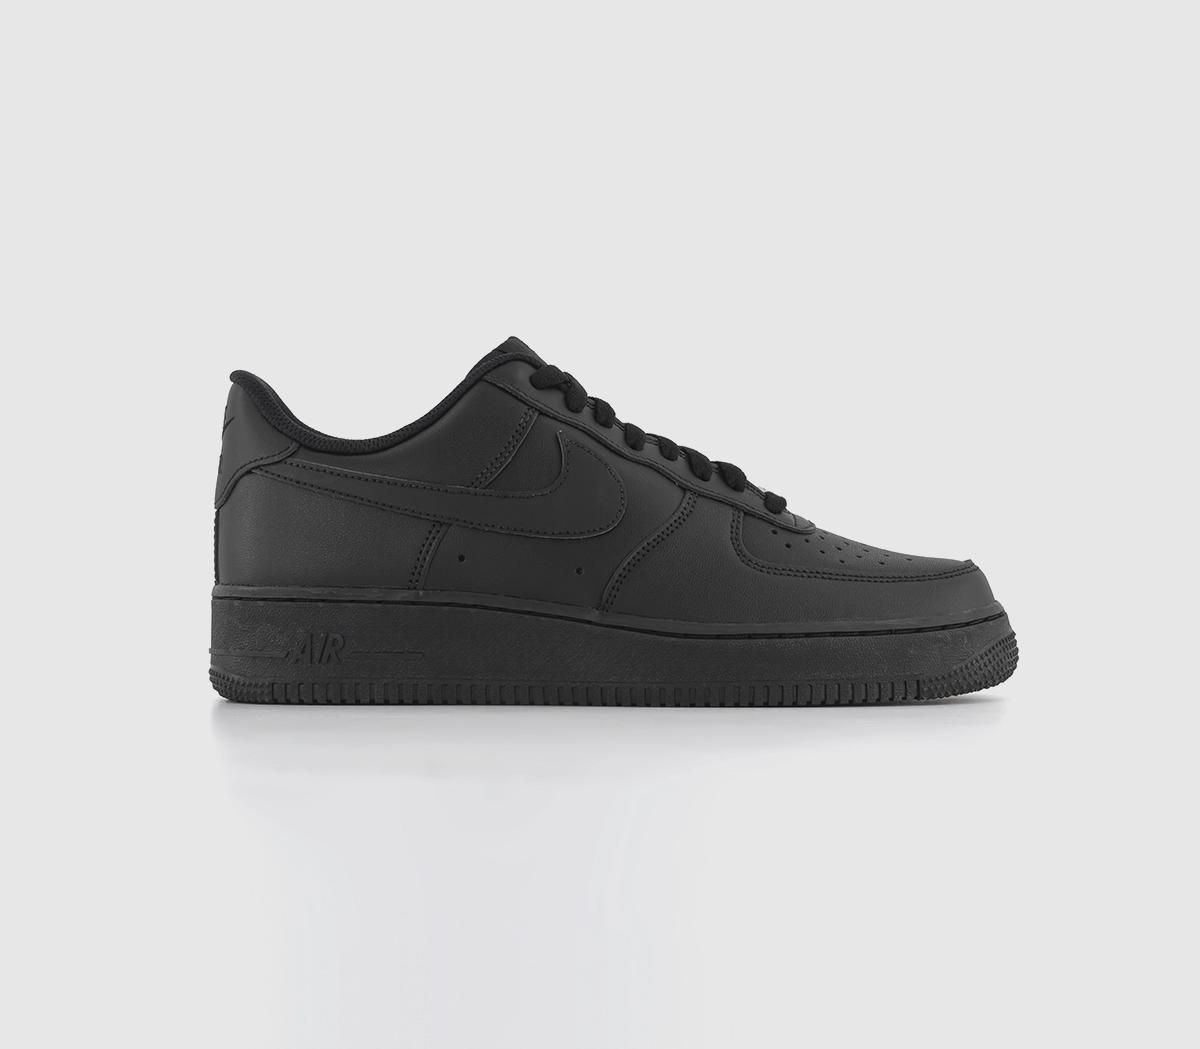 Nike Air Force 1 07 Trainers Black - His trainers